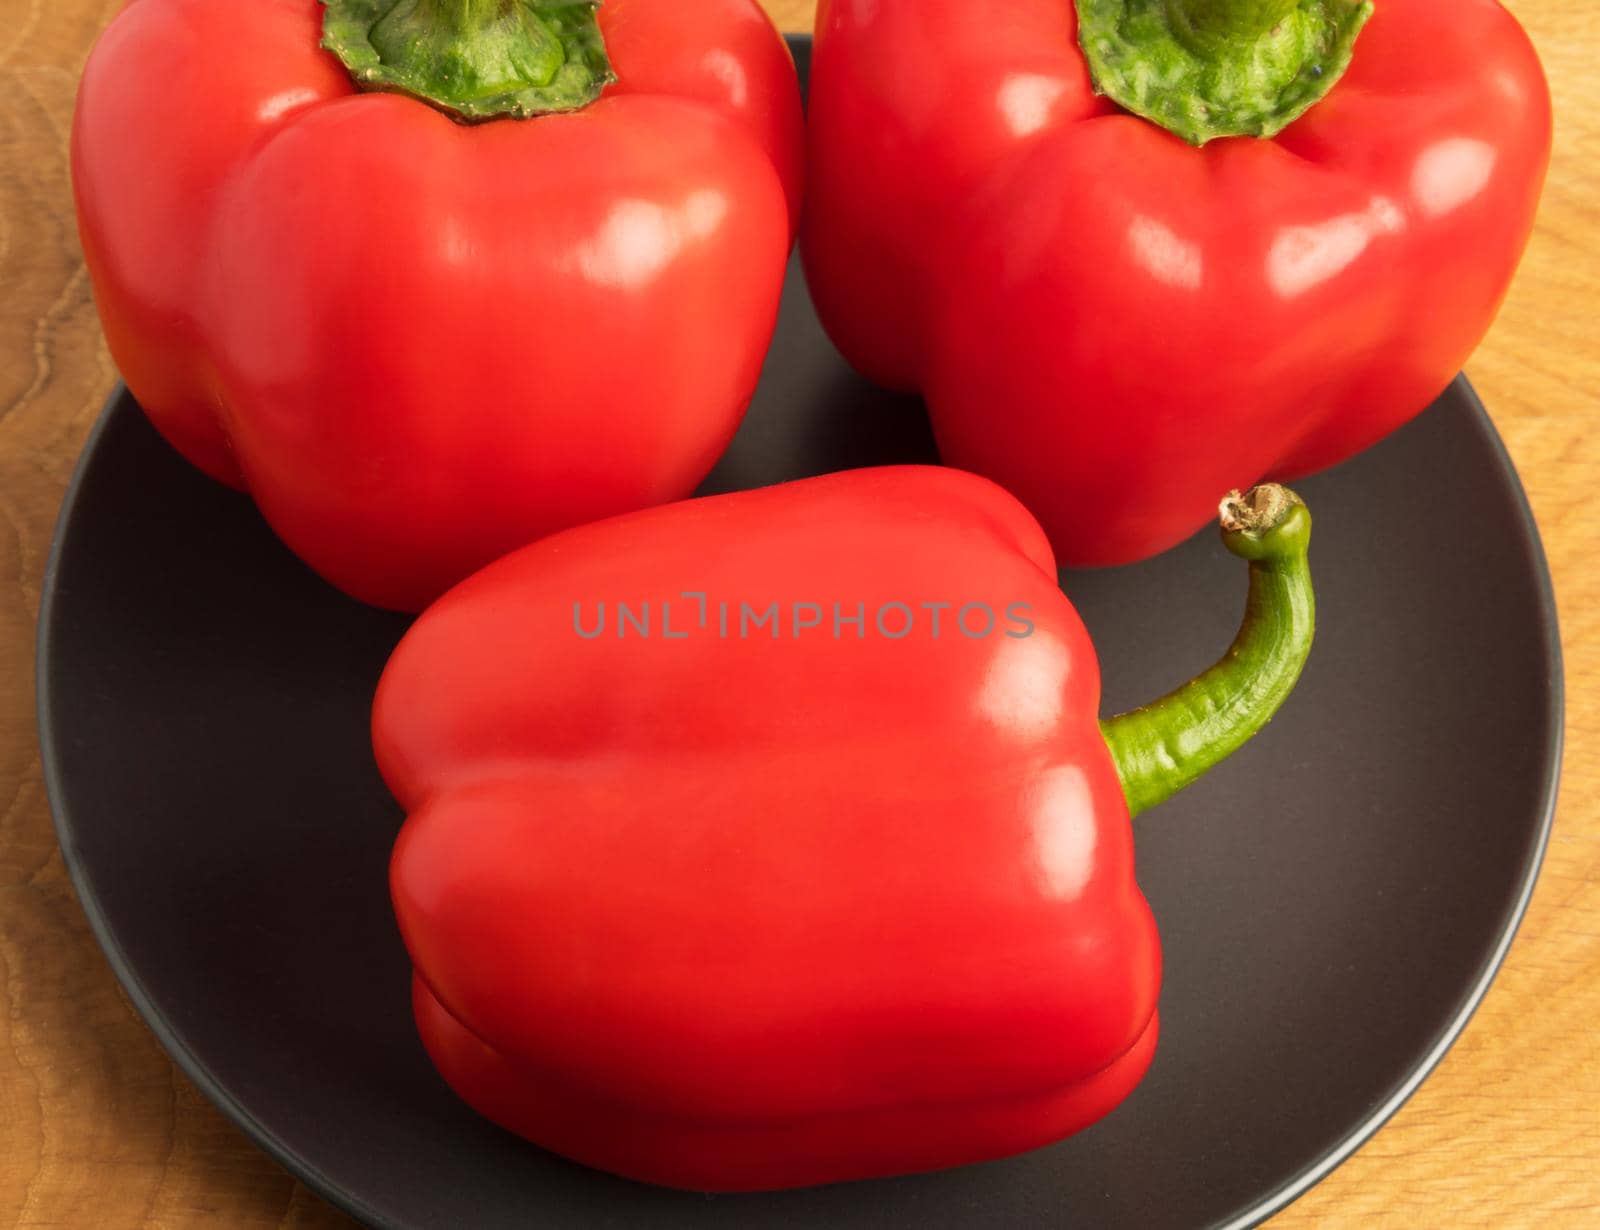 Three sweet red peppers in a black plate on a wooden board